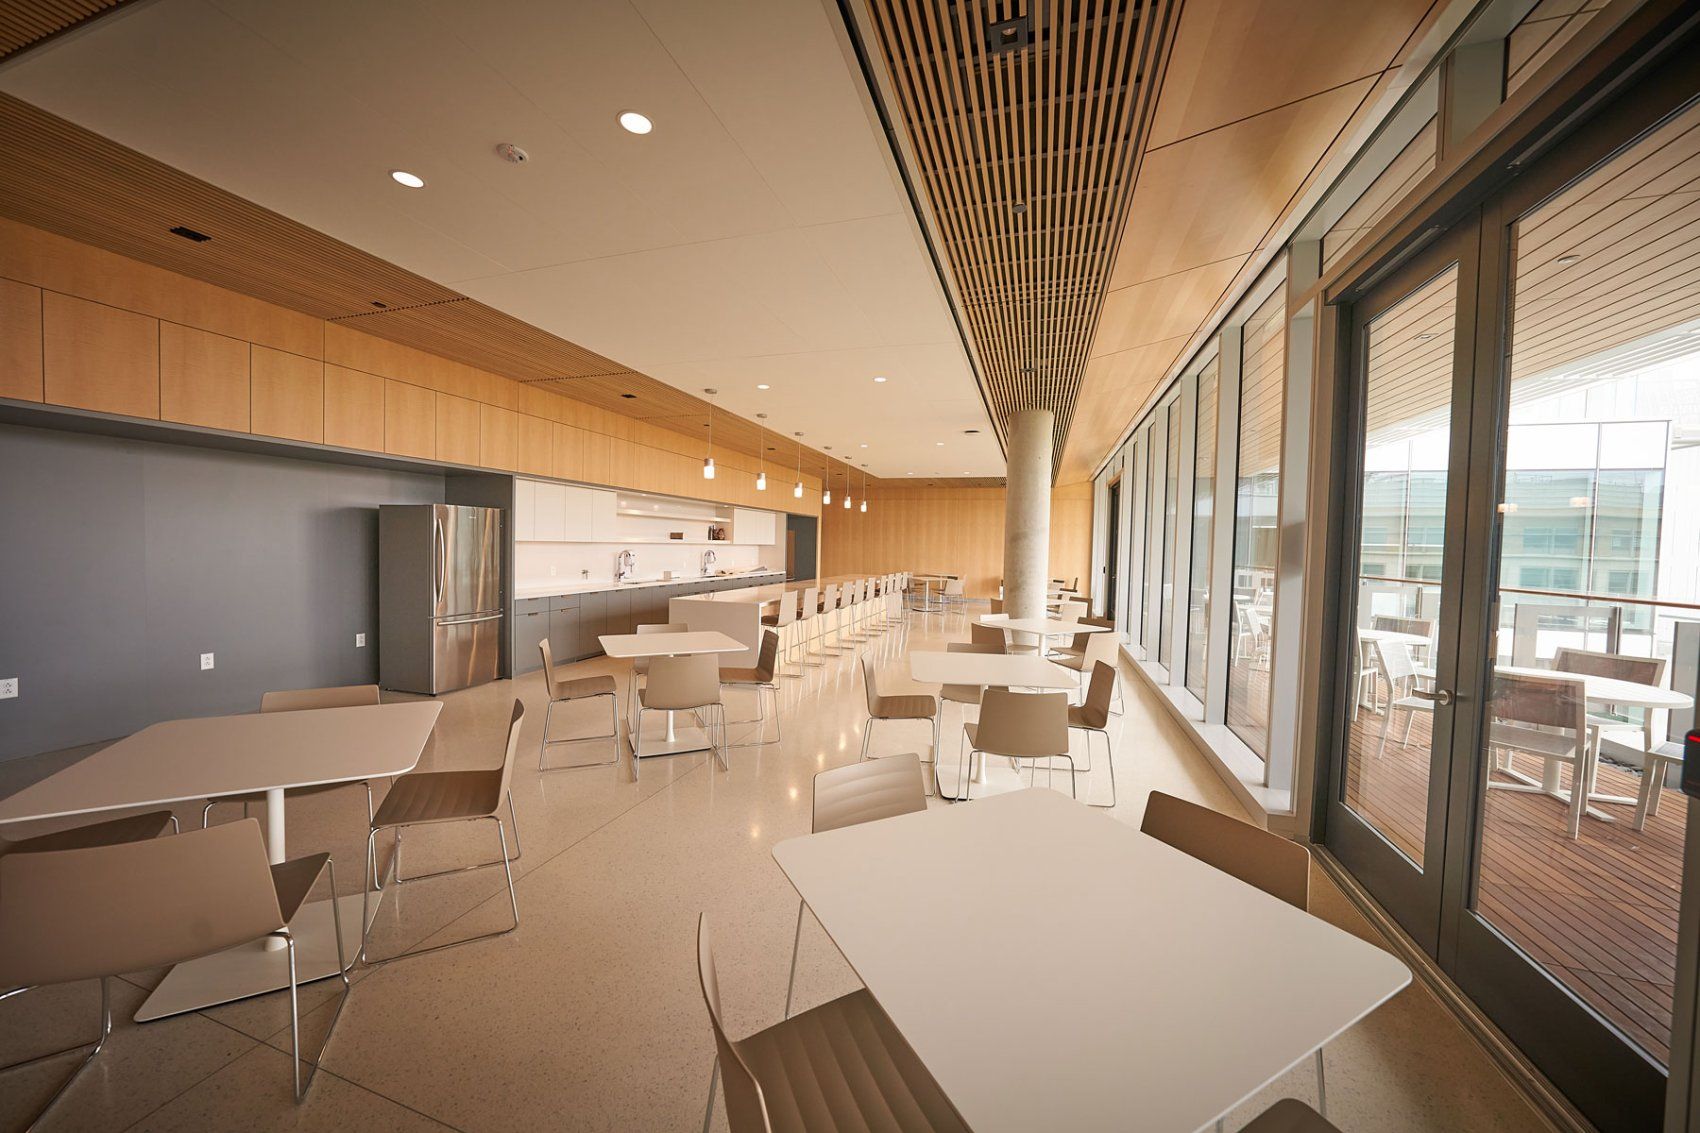 White tables and chairs in an eating area inside the Weill Neurosciences Building